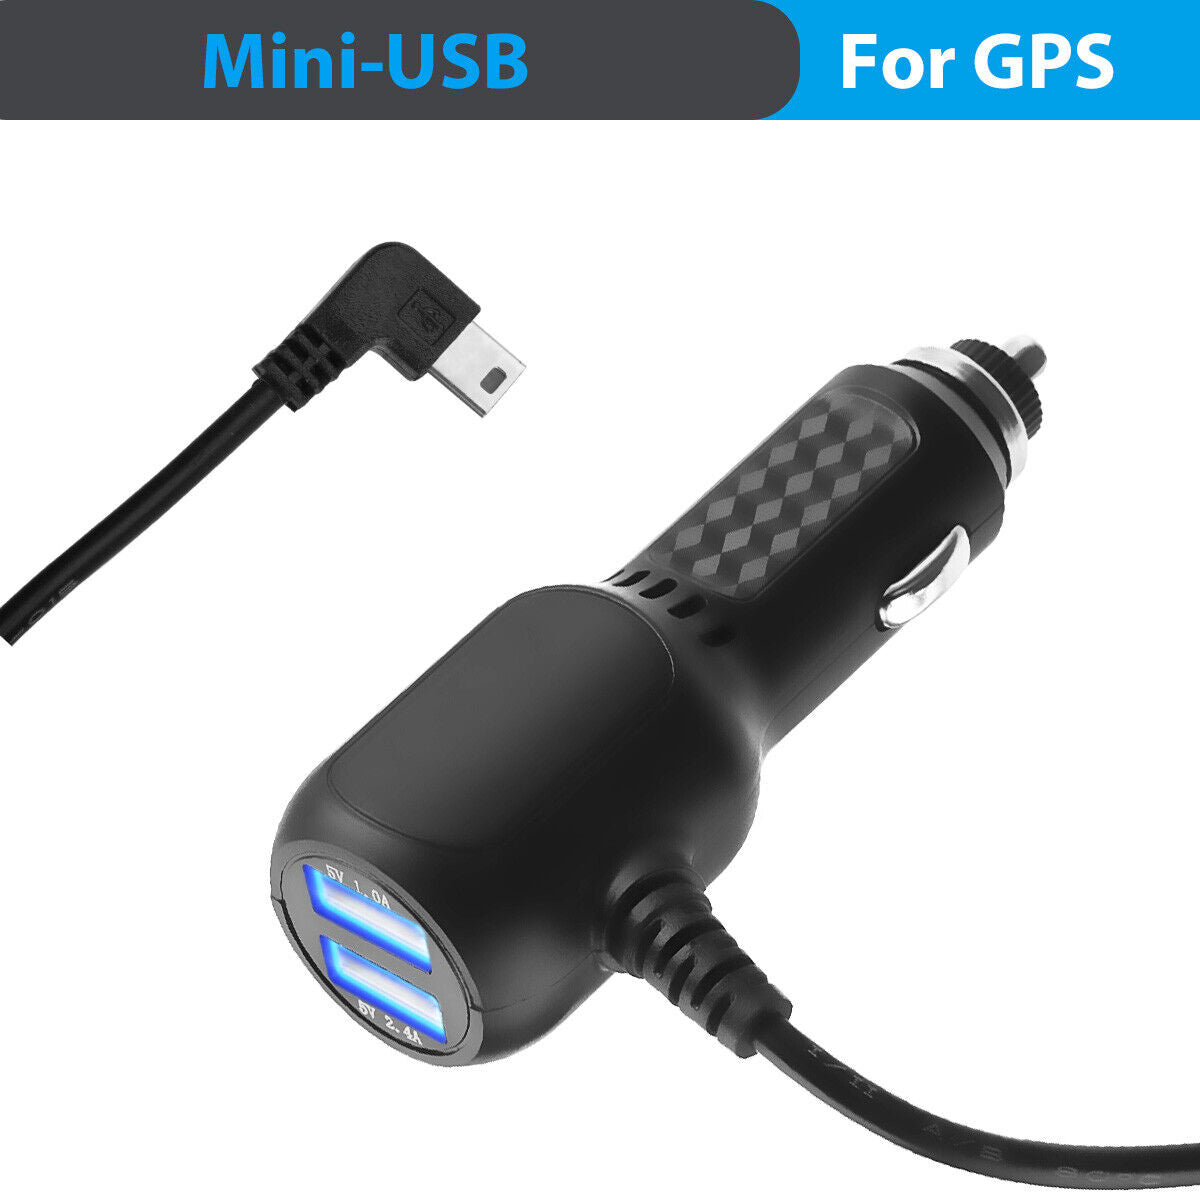 USB Car Charger Power Cord Cable for GARMIN nuvi Vehicle GPS 2595lmt 2597lmt